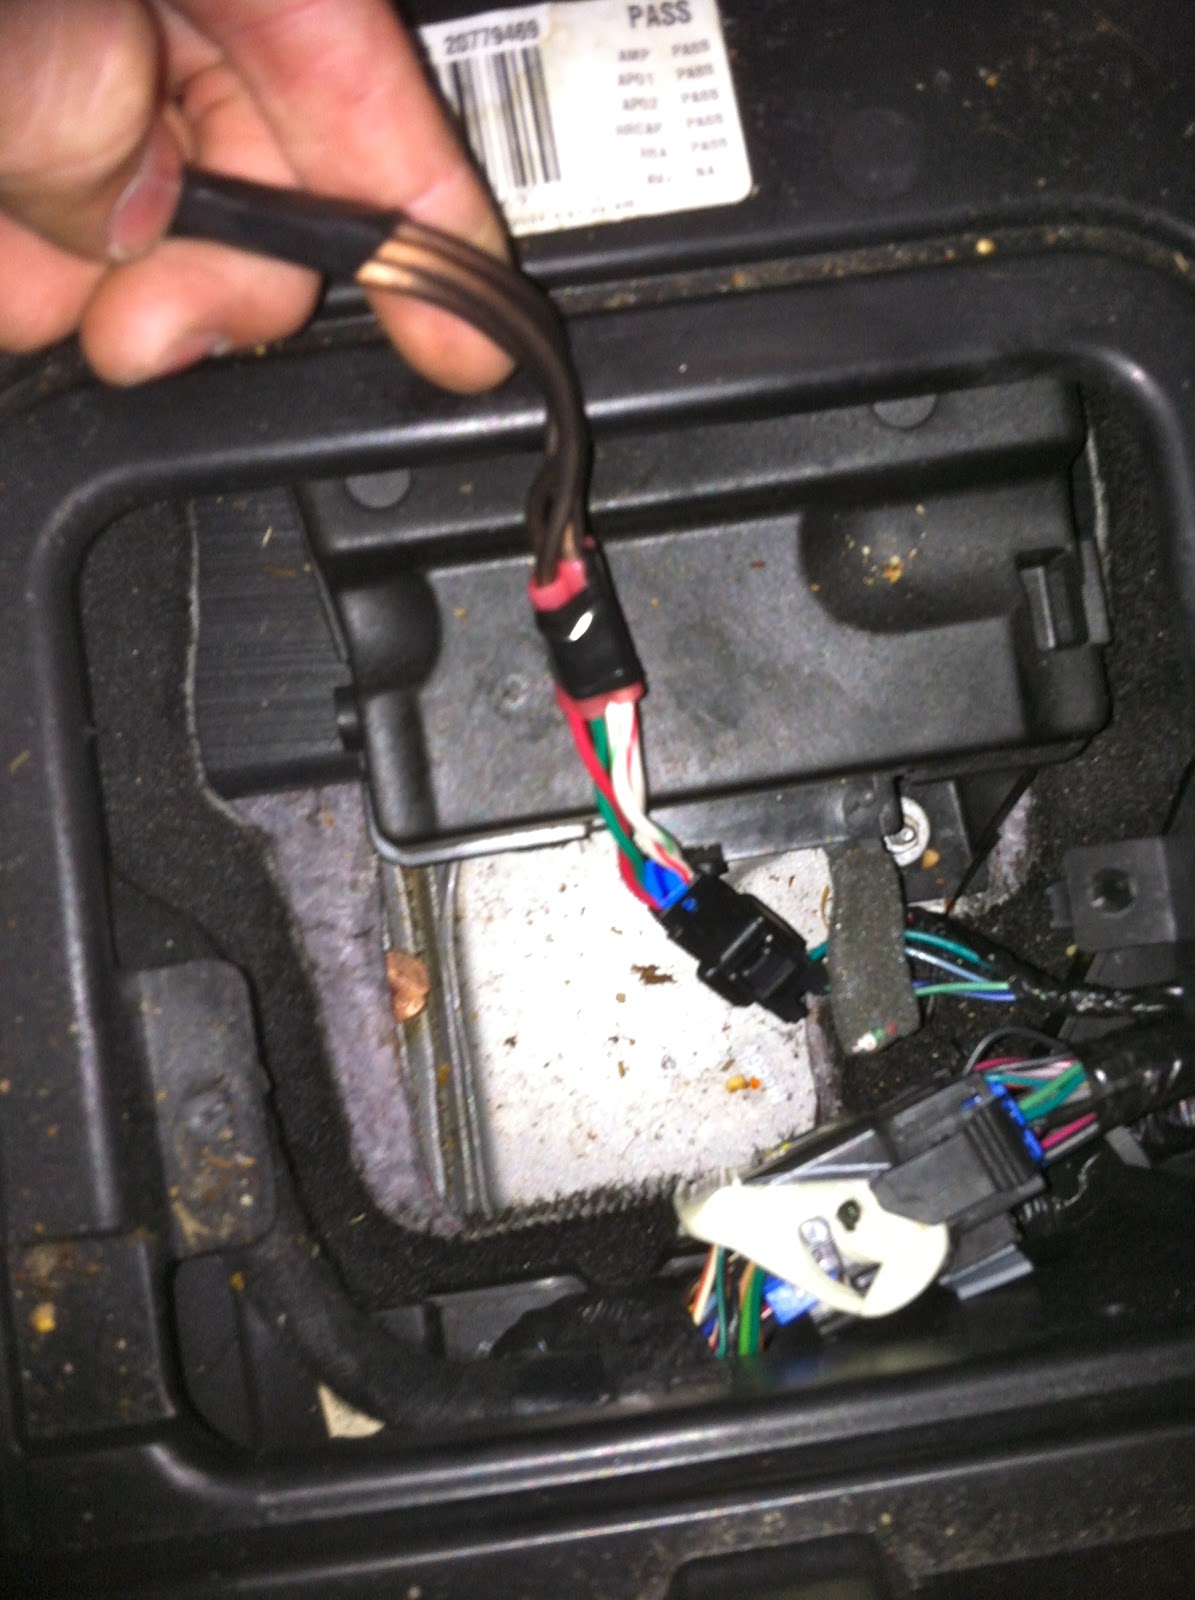 Car Audio Tips Tricks and How To's : GMC Sierra Amp/Sub ... 2010 tundra stereo wiring d 